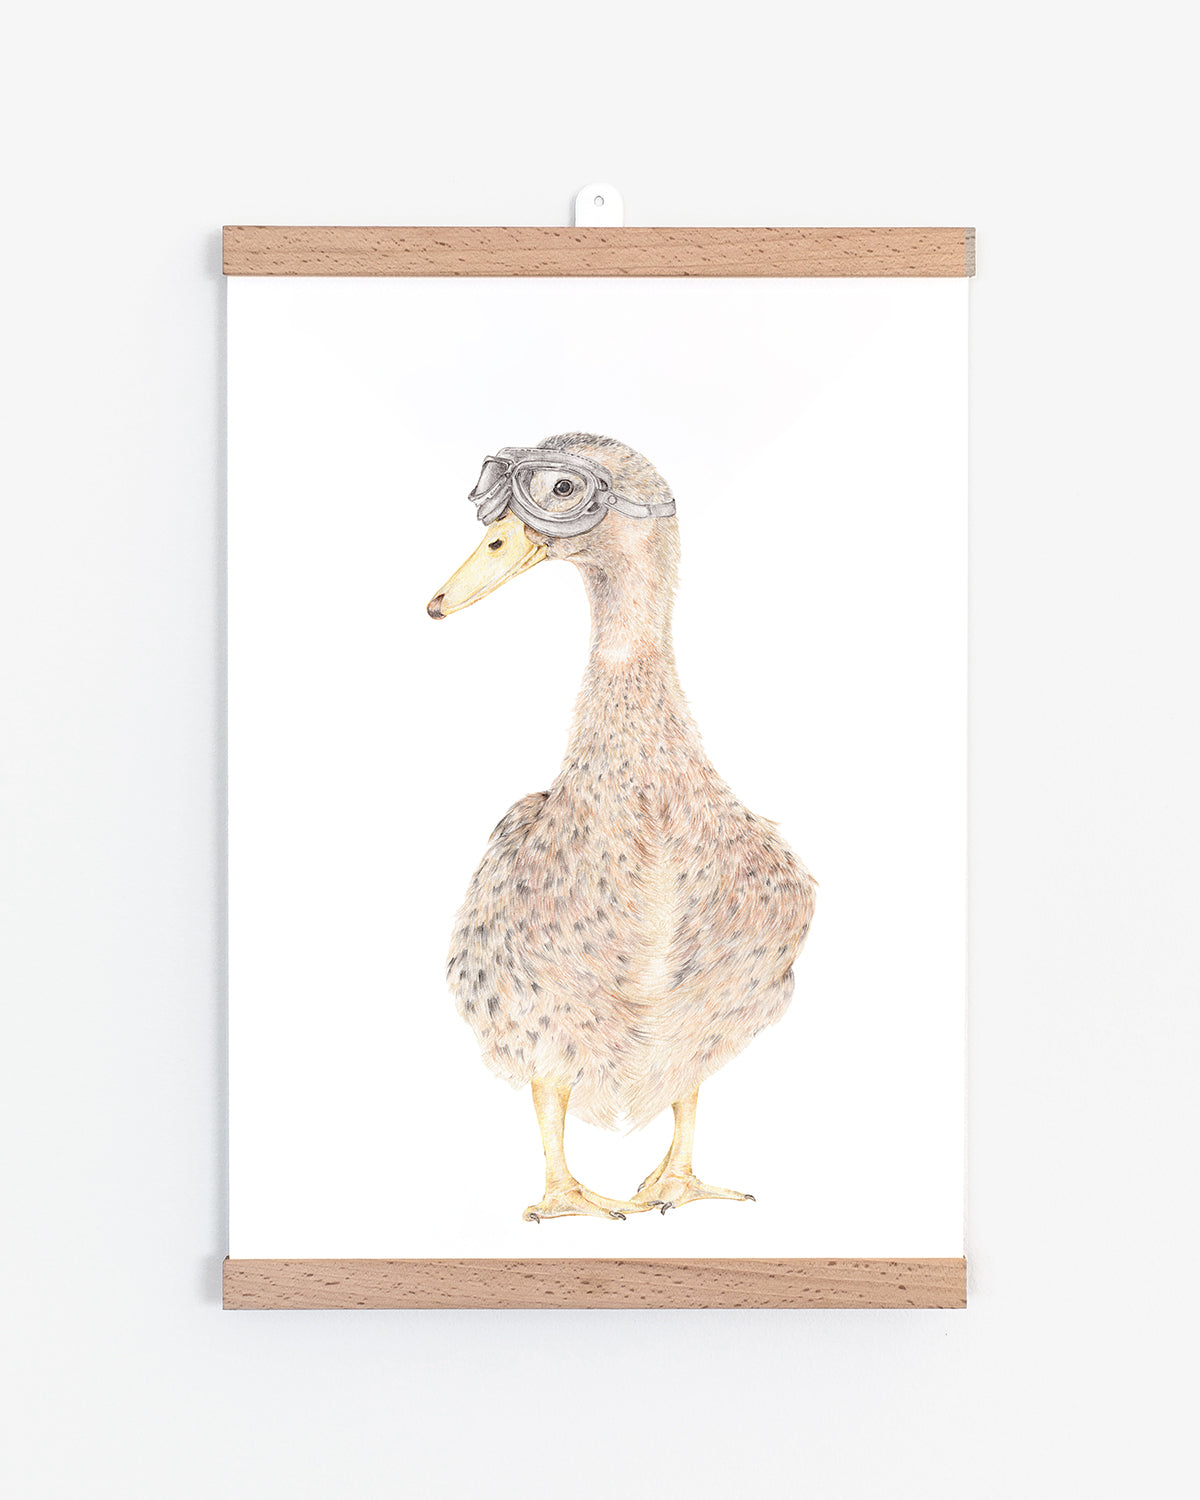 Quirky art print featuring a duck with goggles